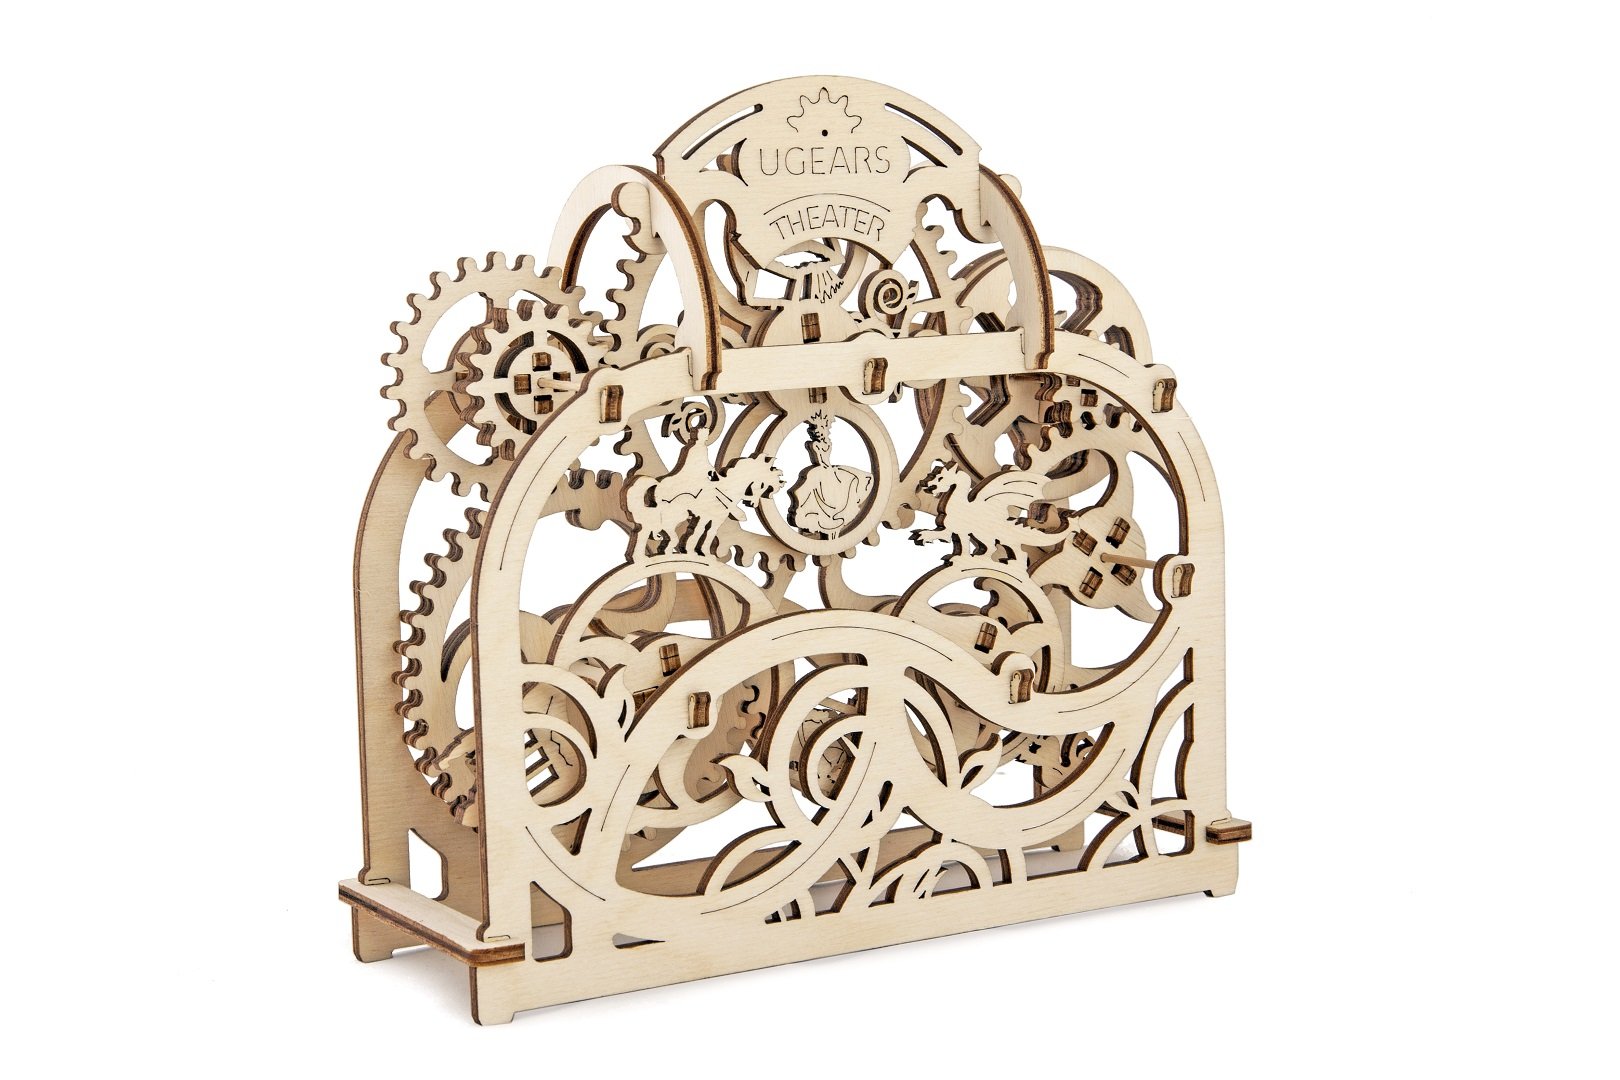 [3D Wooden Puzzle] UGEARS Mechanical Models: Theater